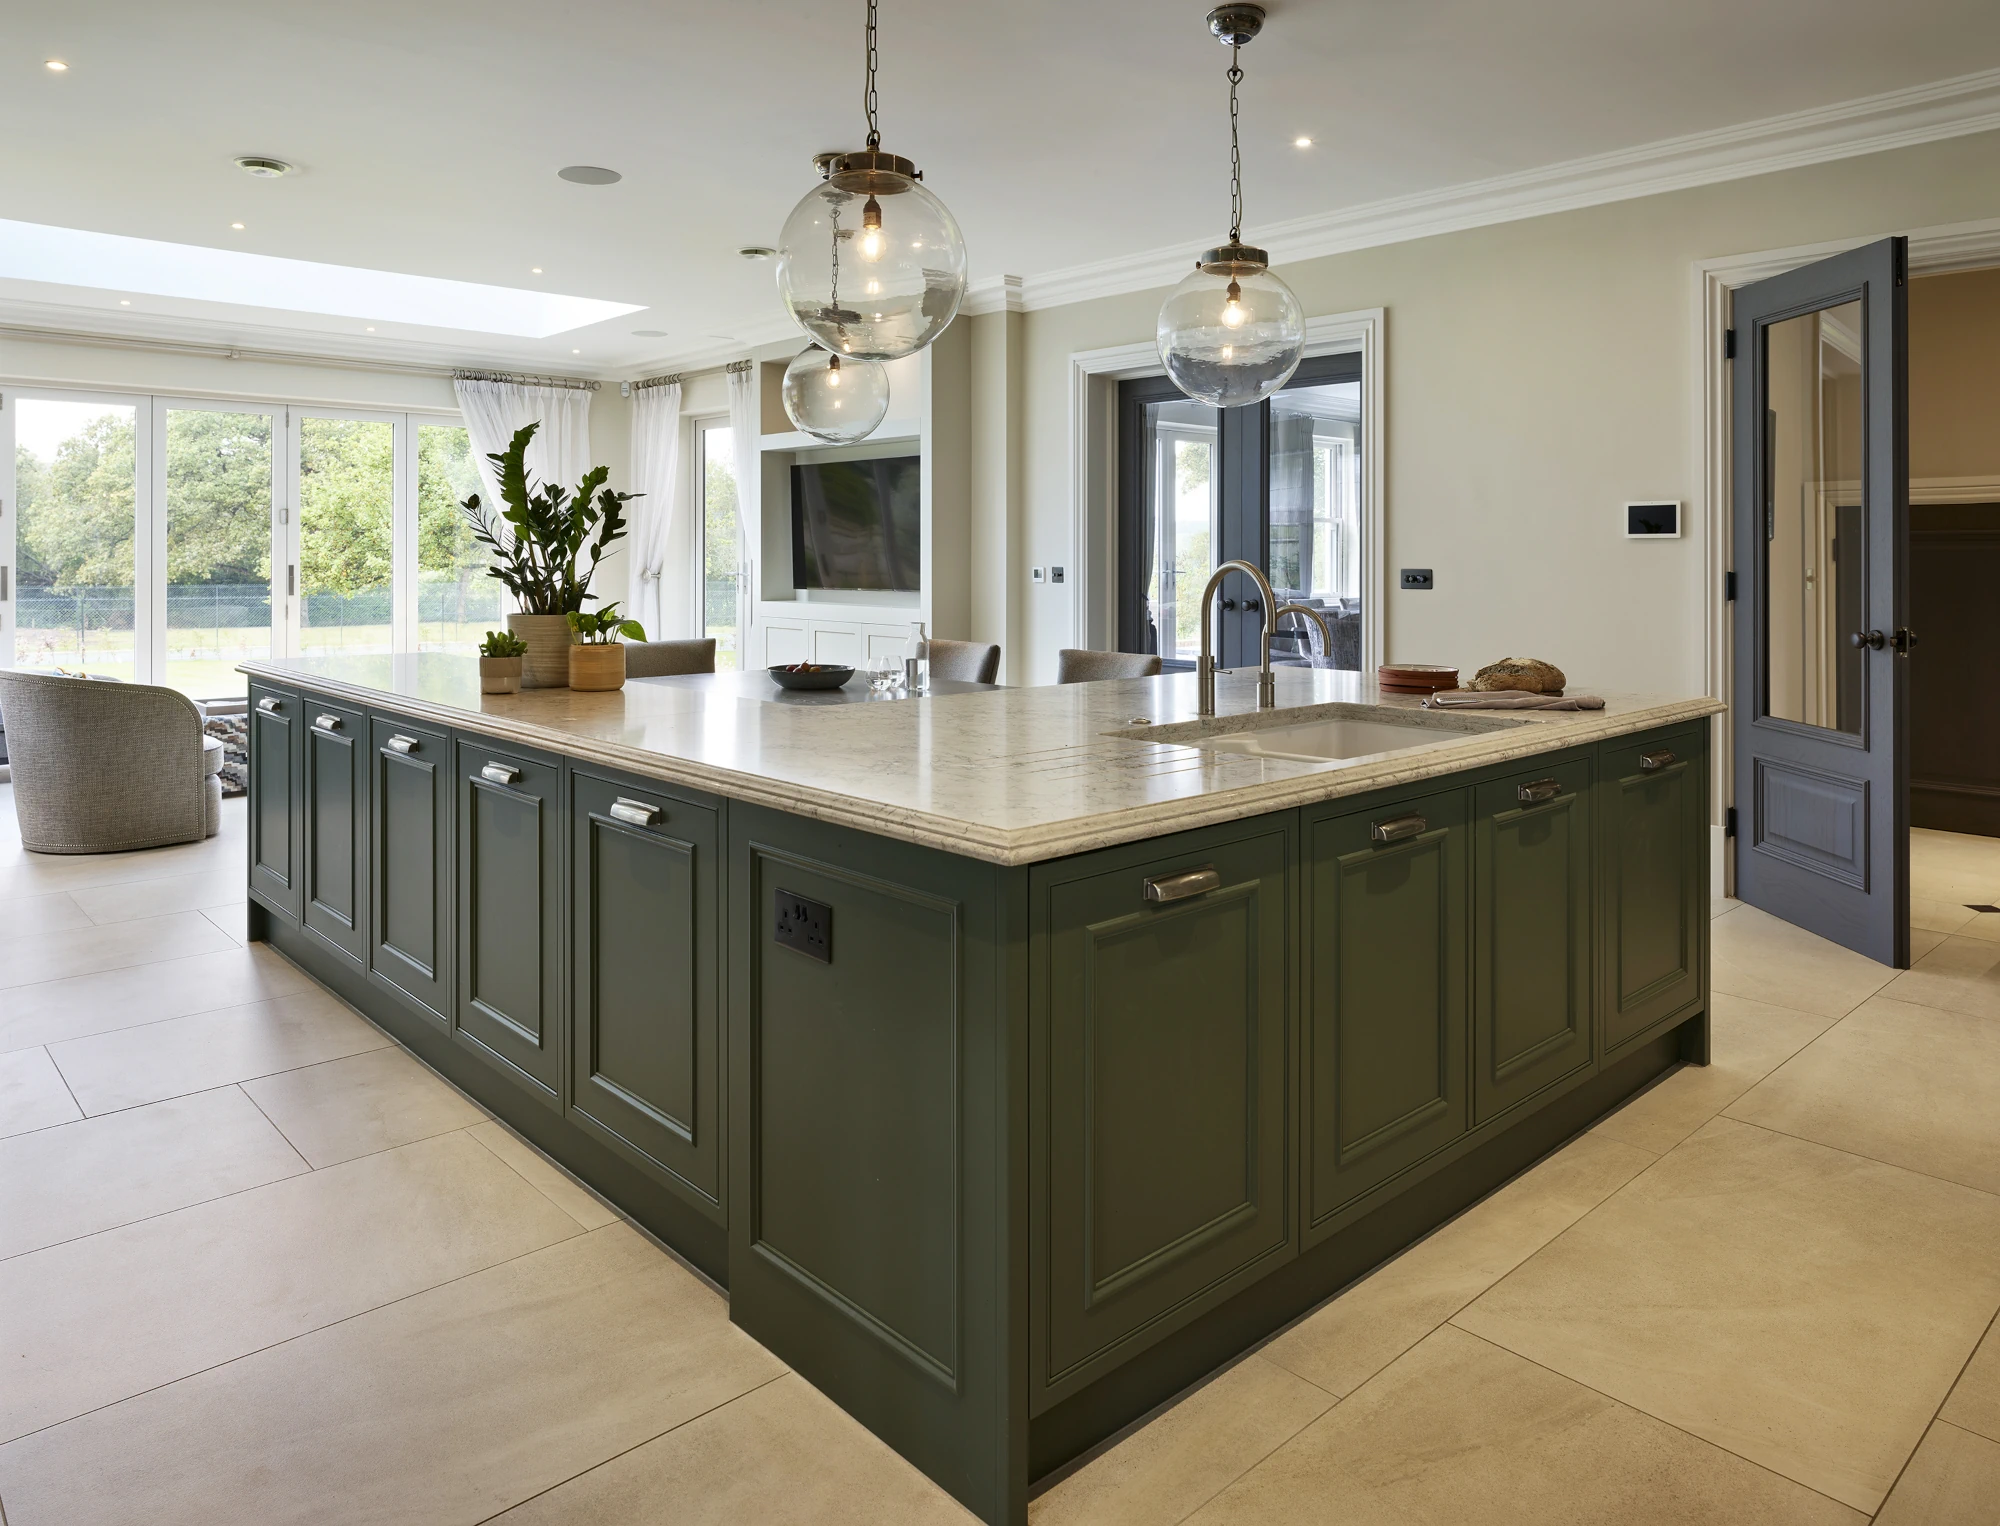 Green classic englemere kitchen with marble topped island with seating.